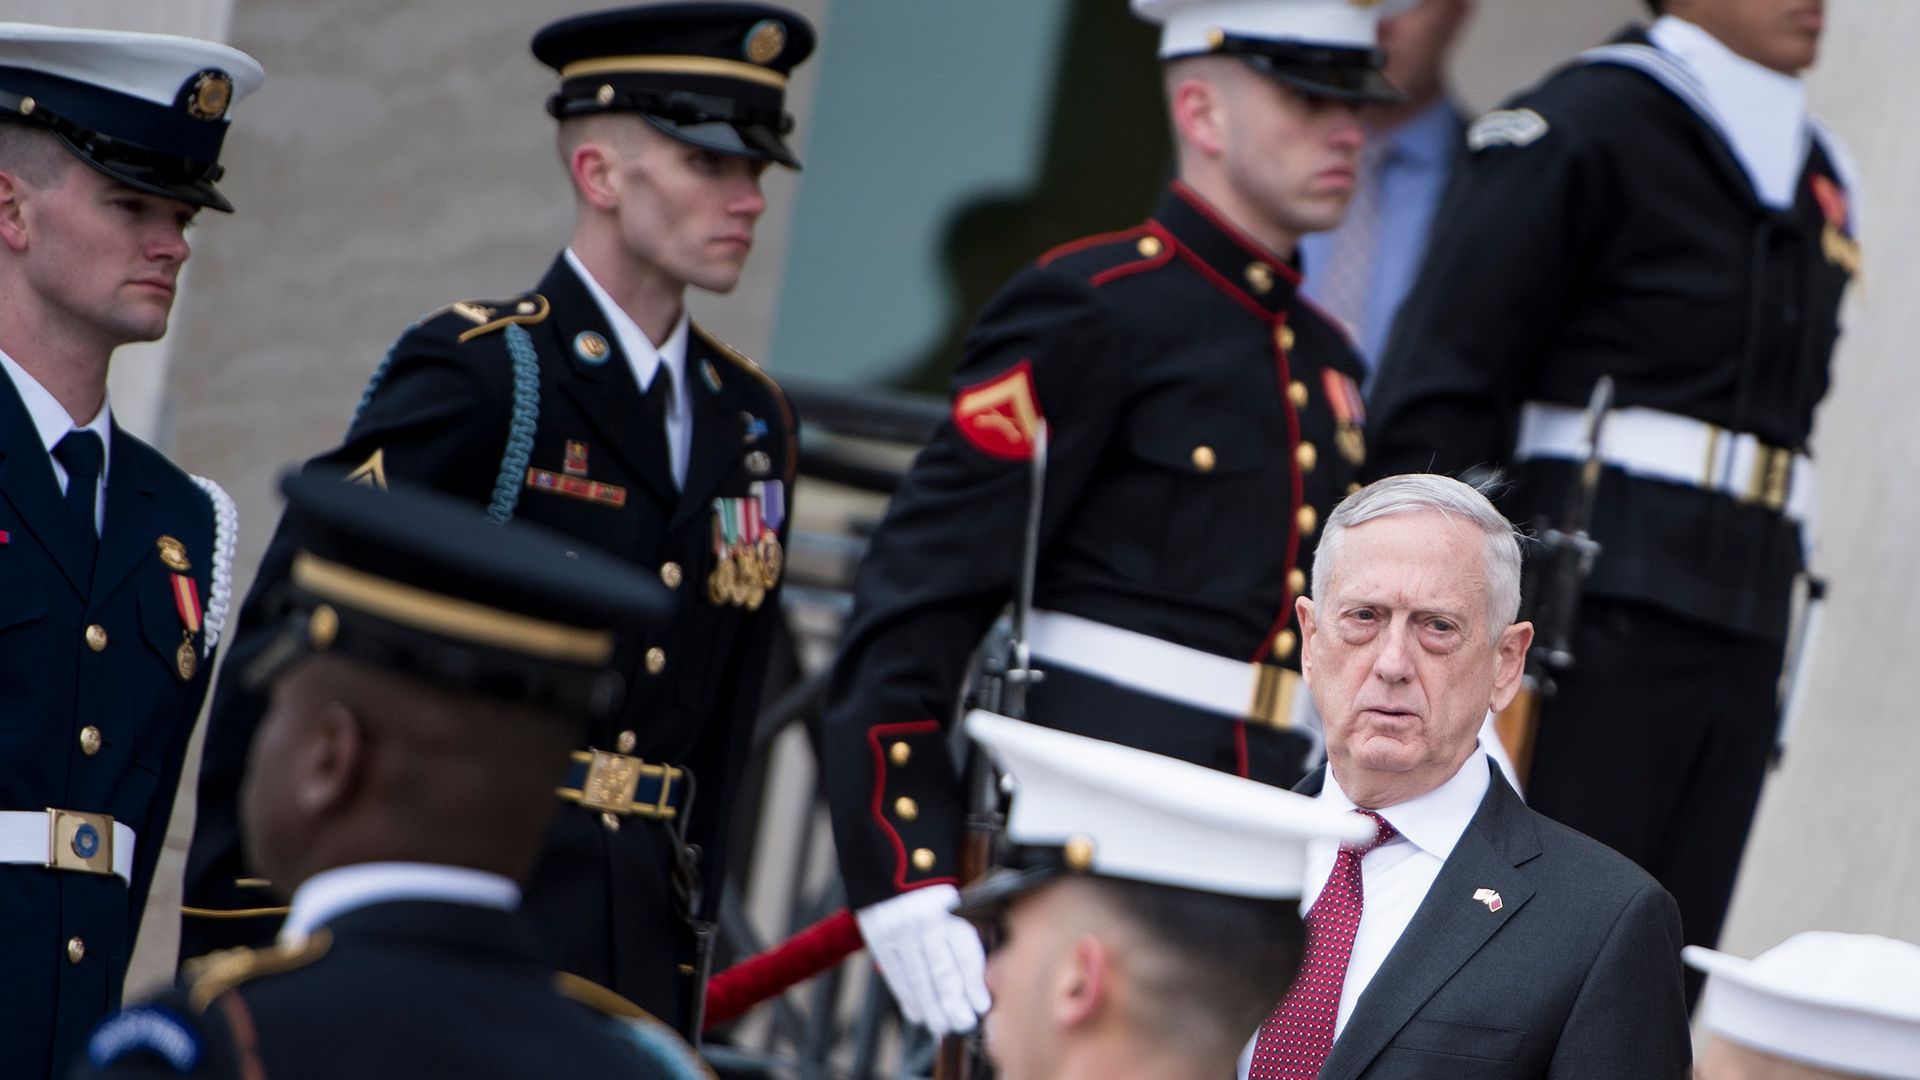 Mattis stands among soldiers